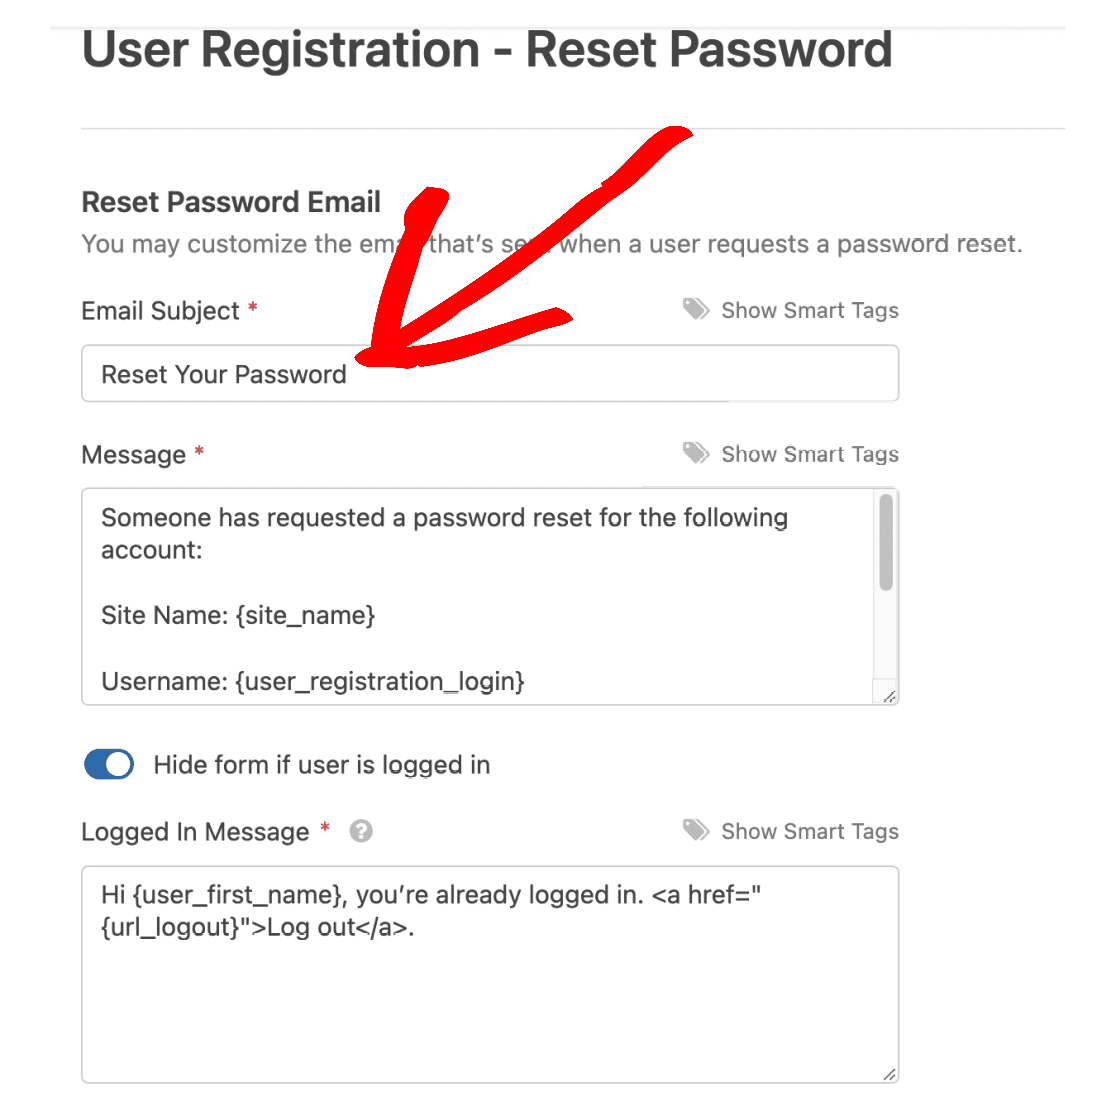 Password reset email subject line